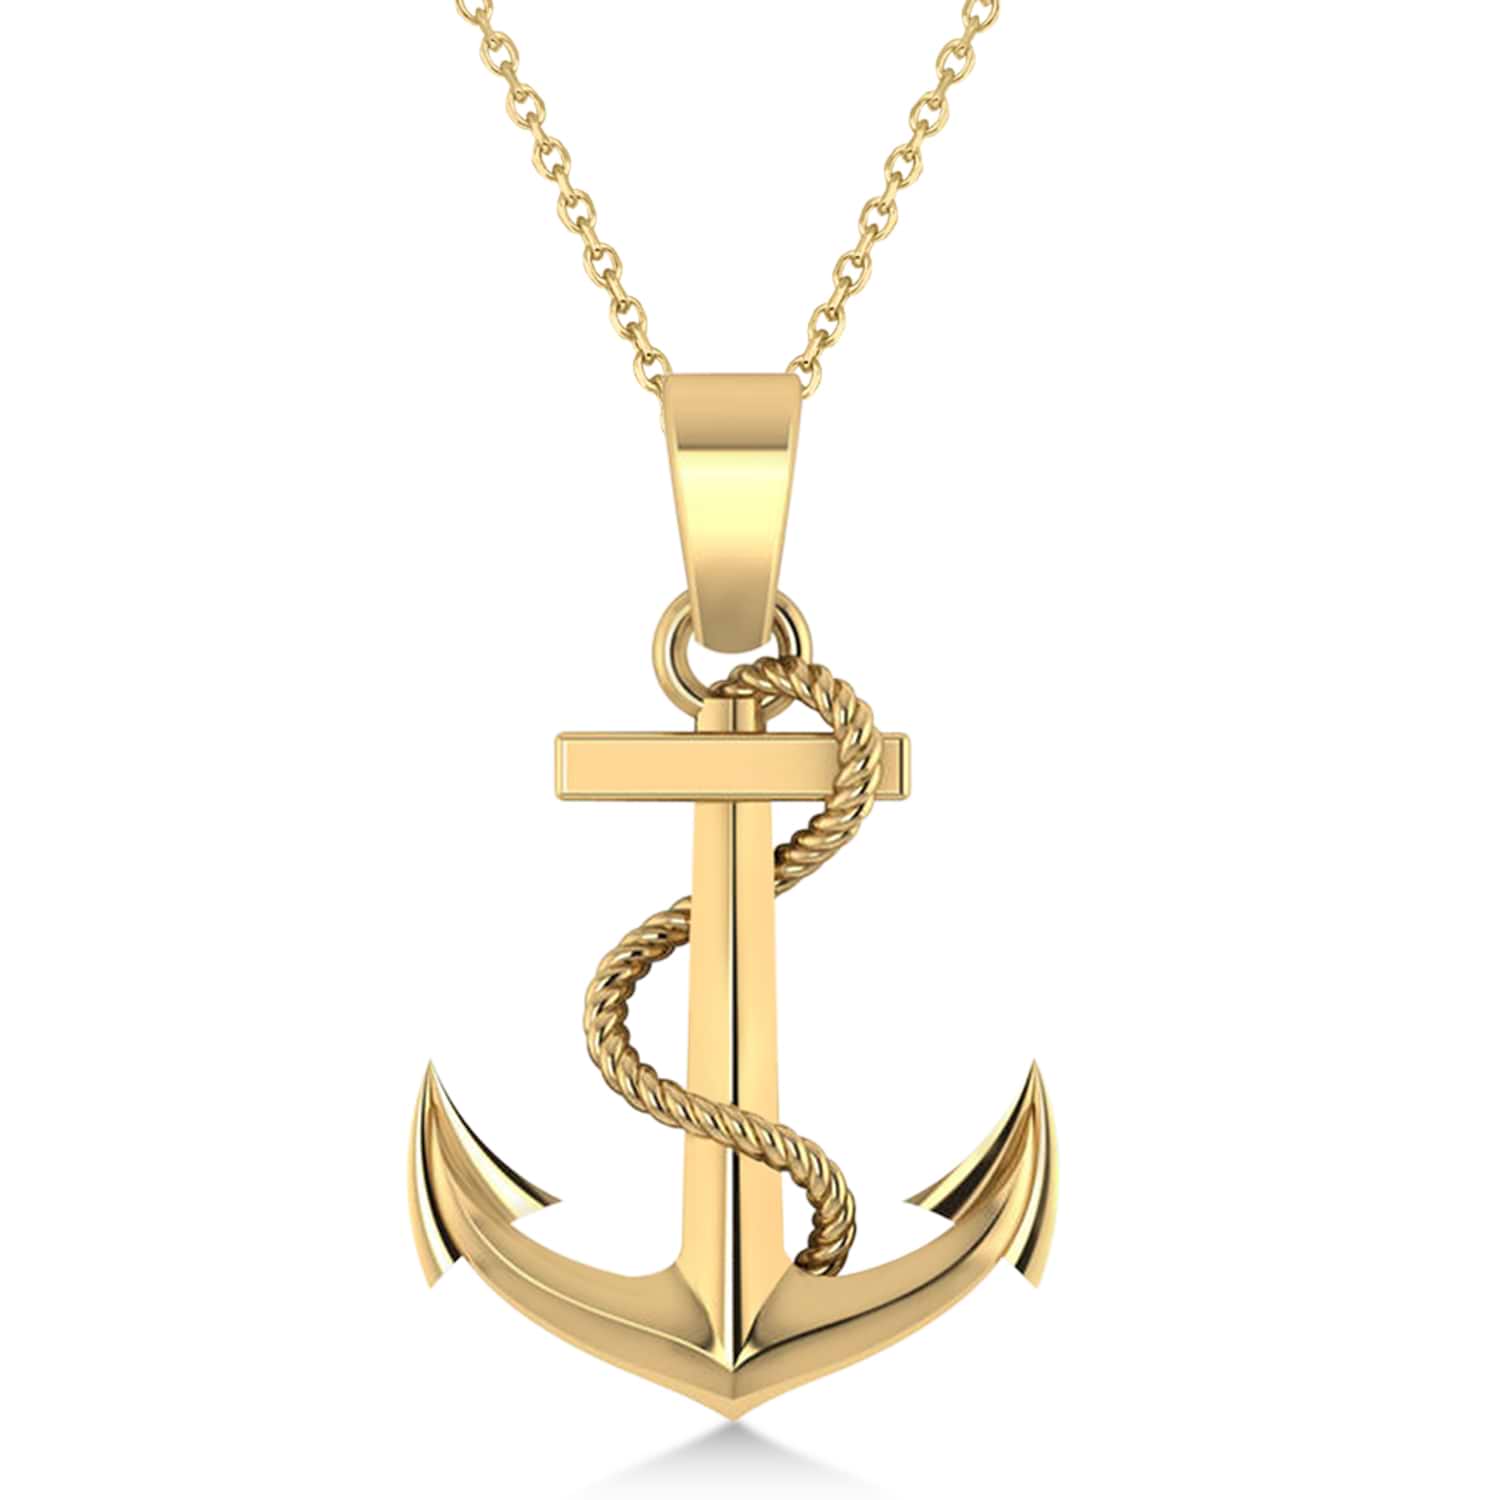 925 pure silver ANCHOR pendant best gifting pendant, wheat chain necklace  locket best gifting delicate unisex jewelry NSP738 | TRIBAL ORNAMENTS